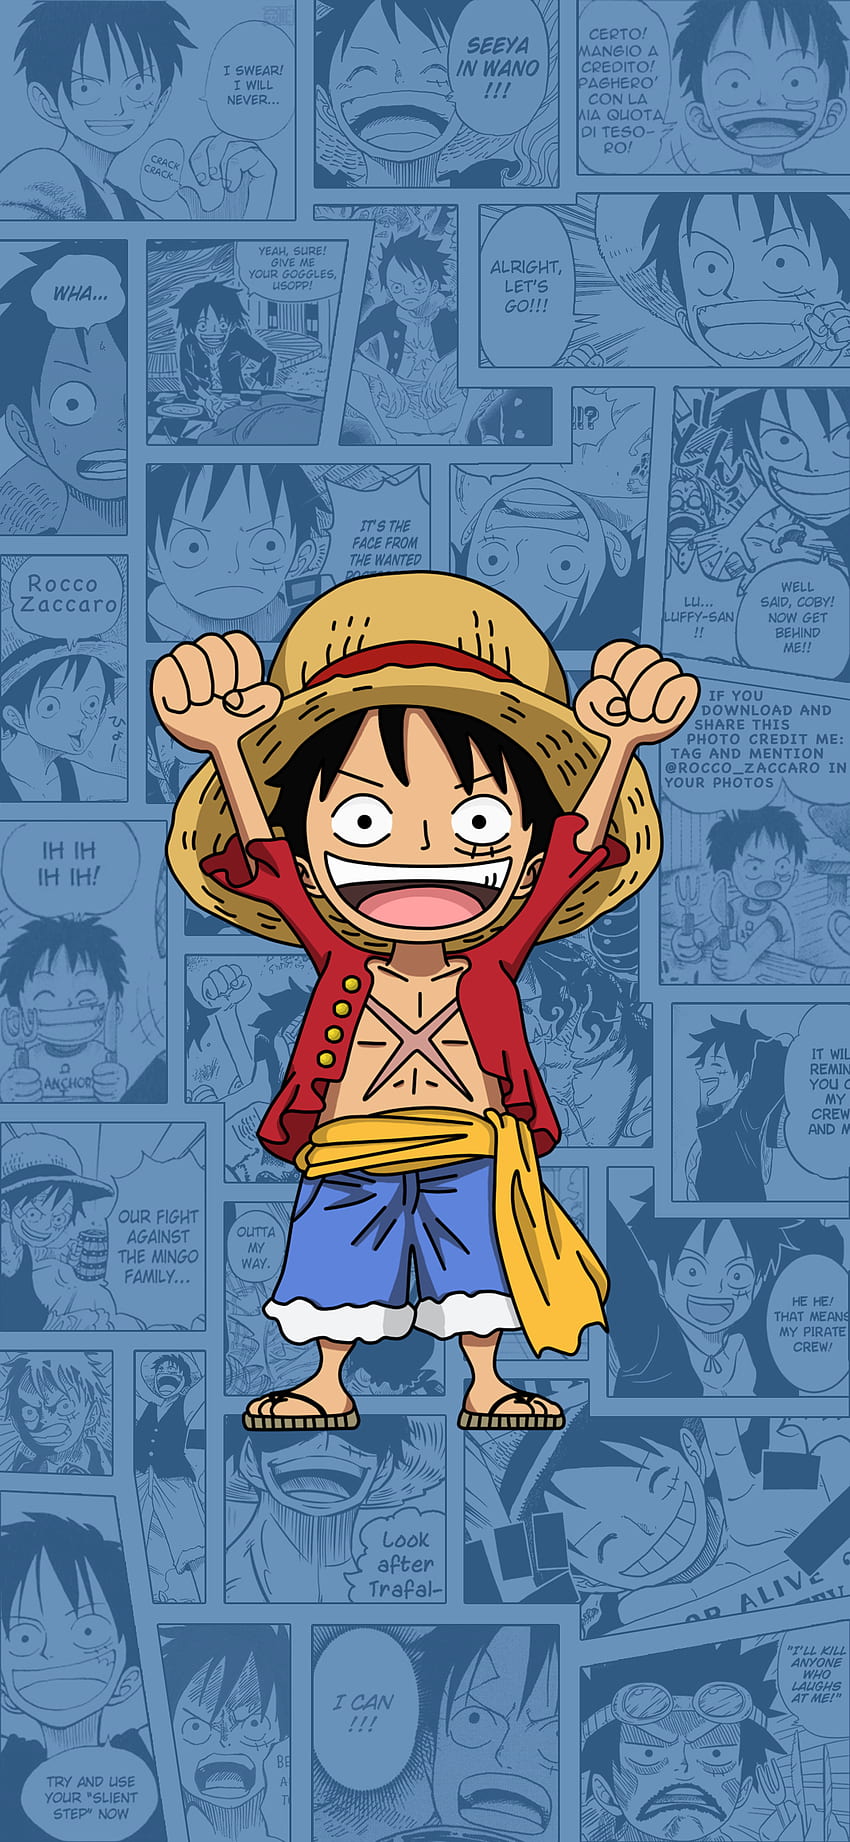 Wallpaper ID 340578  Anime One Piece Phone Wallpaper Monkey D Luffy  1200x2000 free download